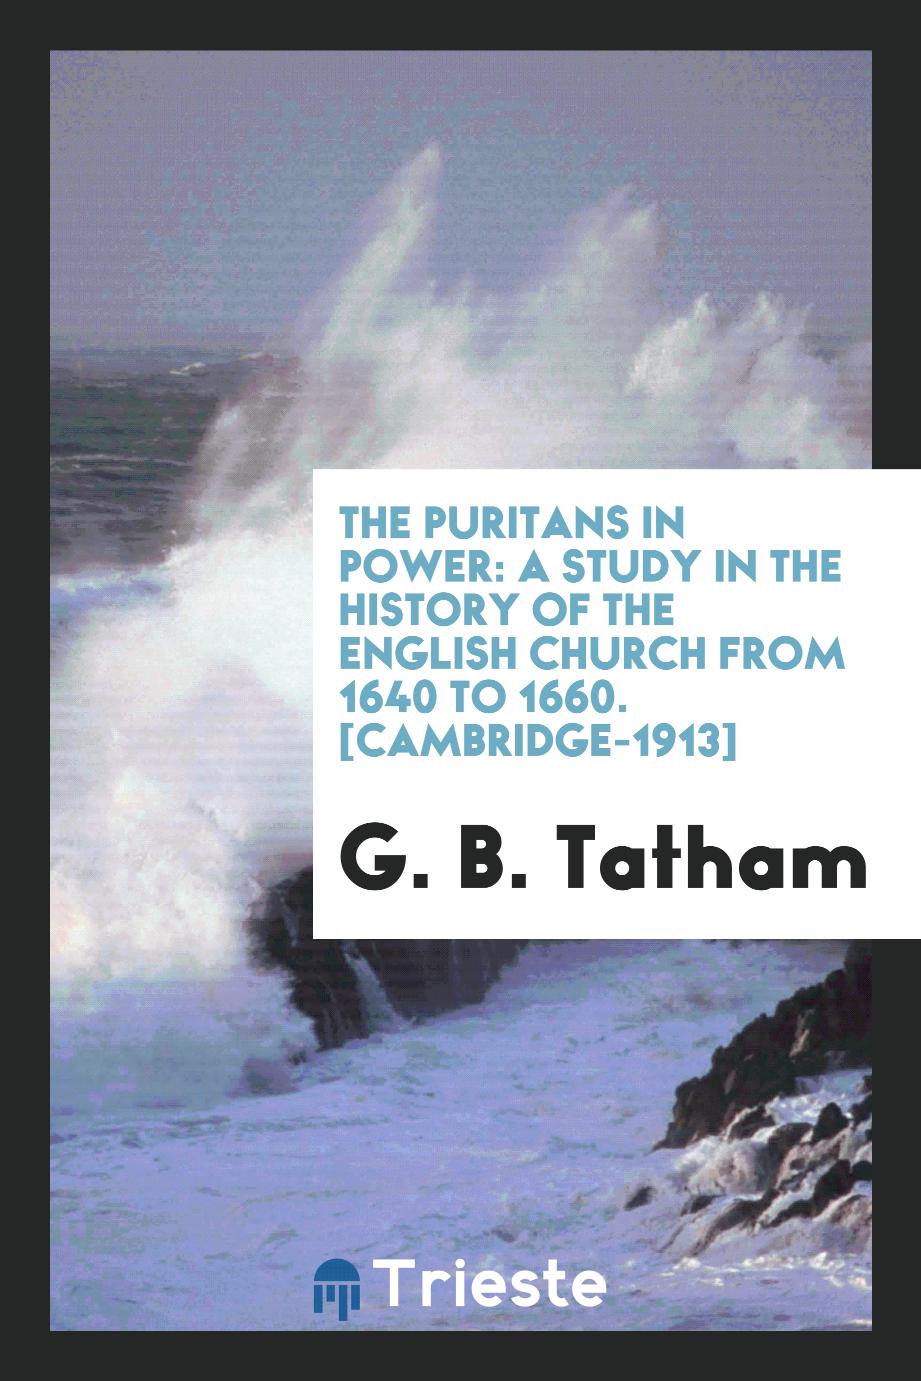 The Puritans in Power: A Study in the History of the English Church from 1640 to 1660. [Cambridge-1913]